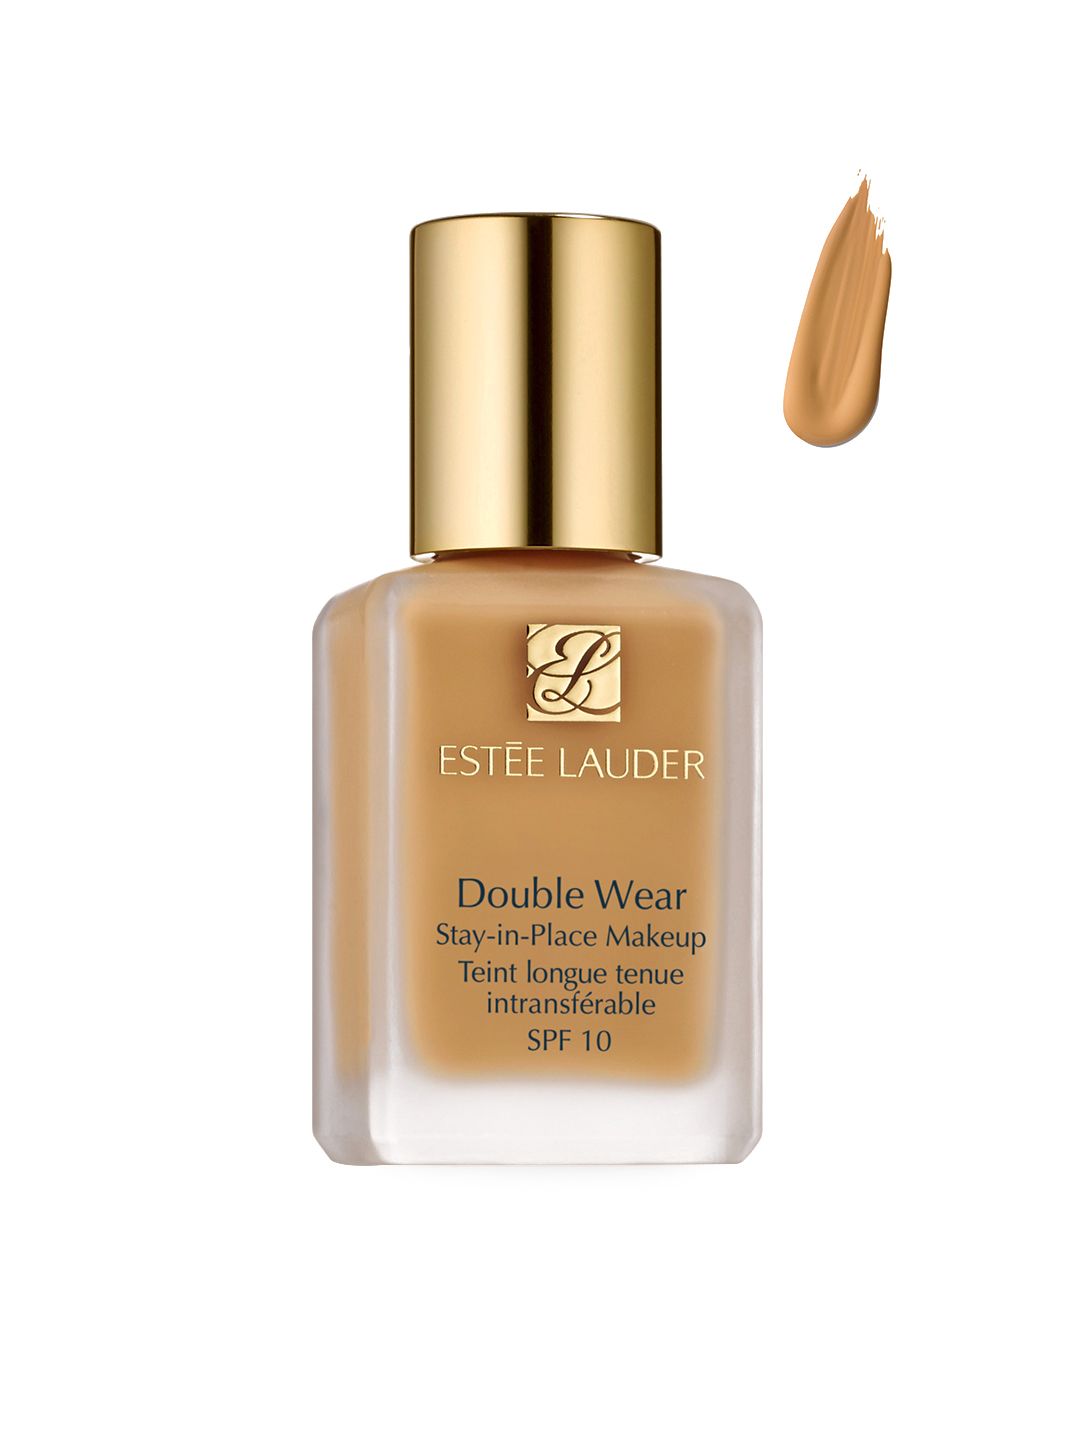 Estee Lauder Double Wear Stay-in-Place Makeup With SPF 10 - 2W1 Dawn 30 ml Price in India